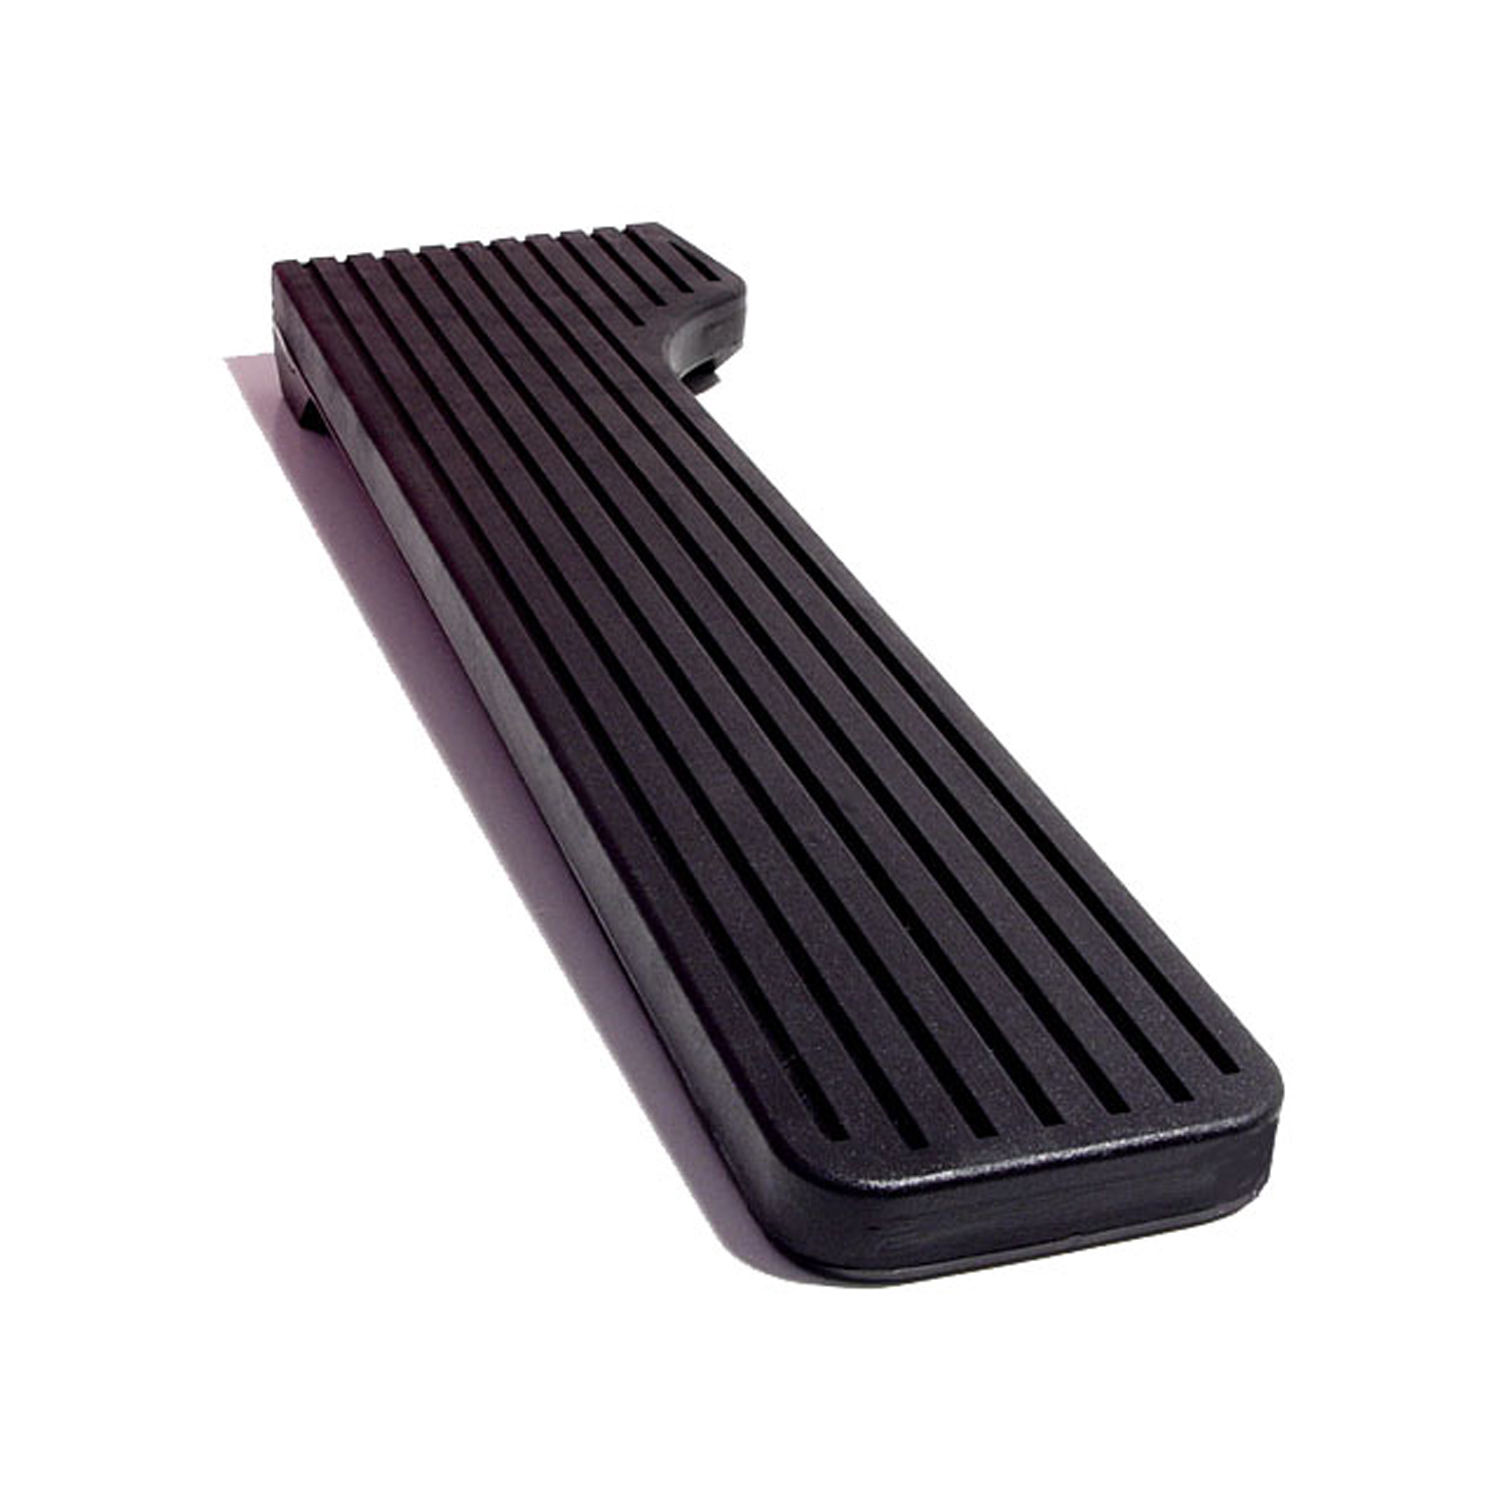 1963 Chevrolet Impala Accelerator Pedal Pad without flange-AP 31-B